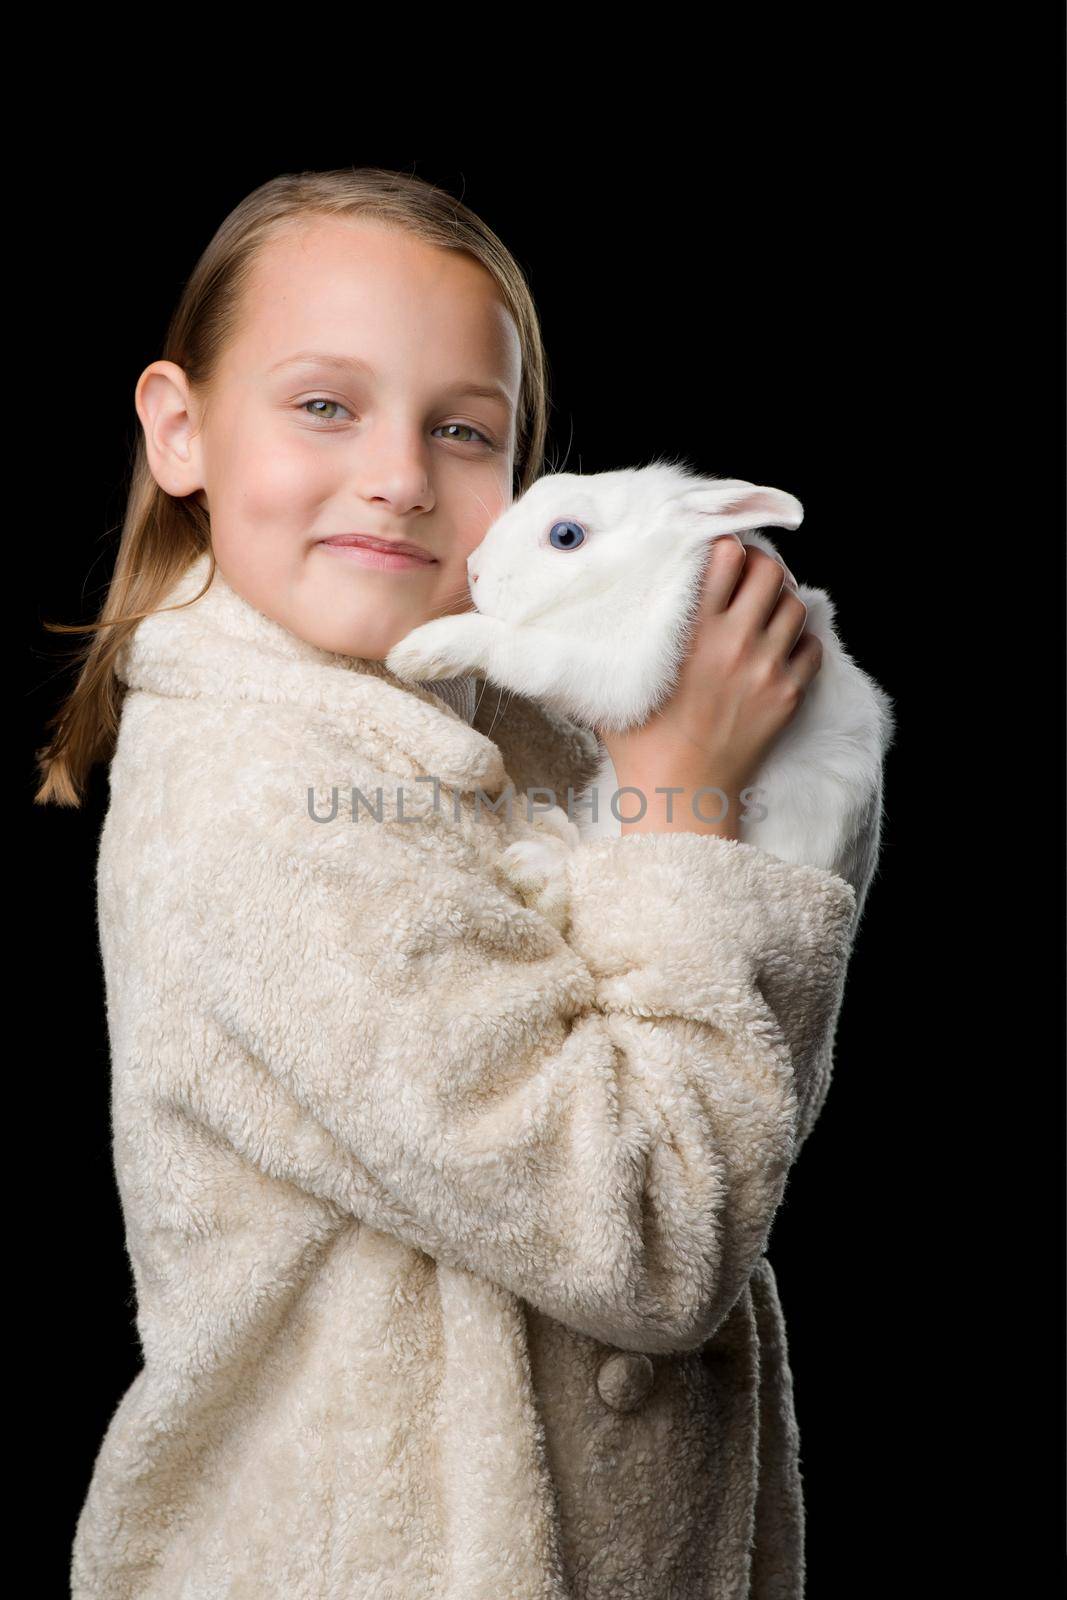 Pretty girl hugging white rabbit. Stylish beautiful girl in beige fur coat holding cute bunny. Portrait of preteen child posing with pet animal in studio against black background